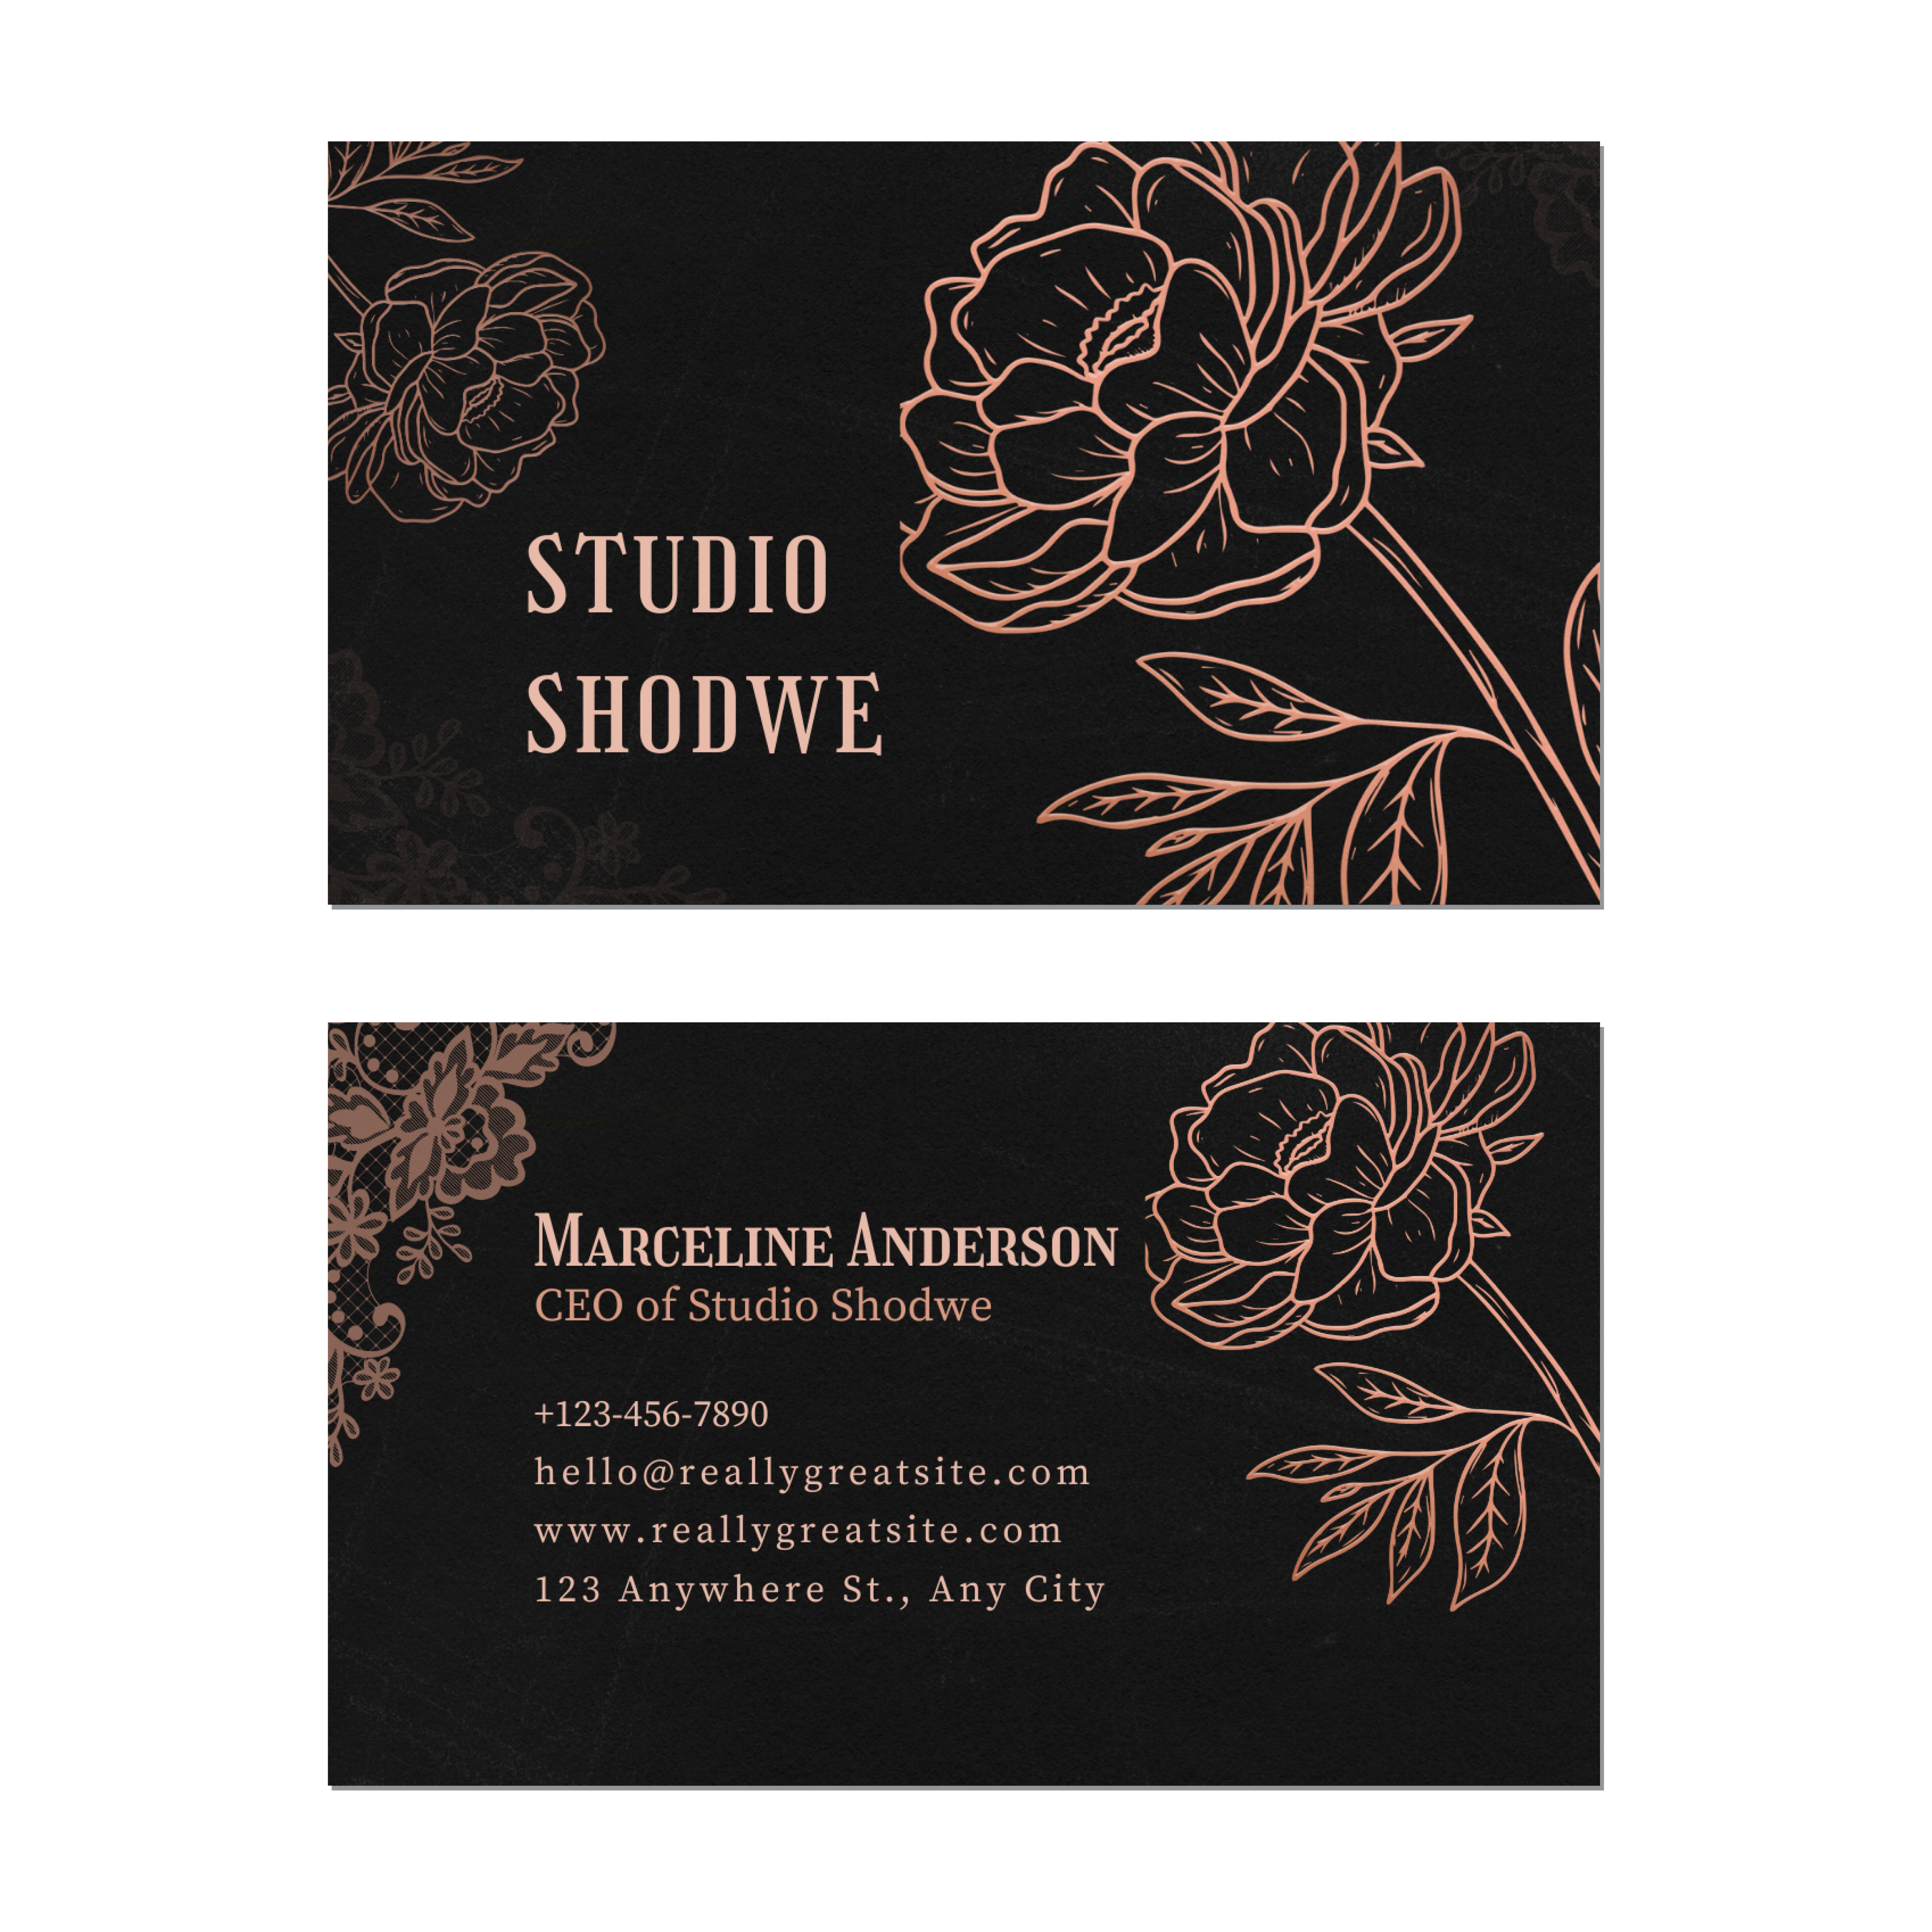 Business card template colorful flora decor flat sketch Vectors graphic art  designs in editable .ai .eps .svg .cdr format free and easy download  unlimit id:6846424